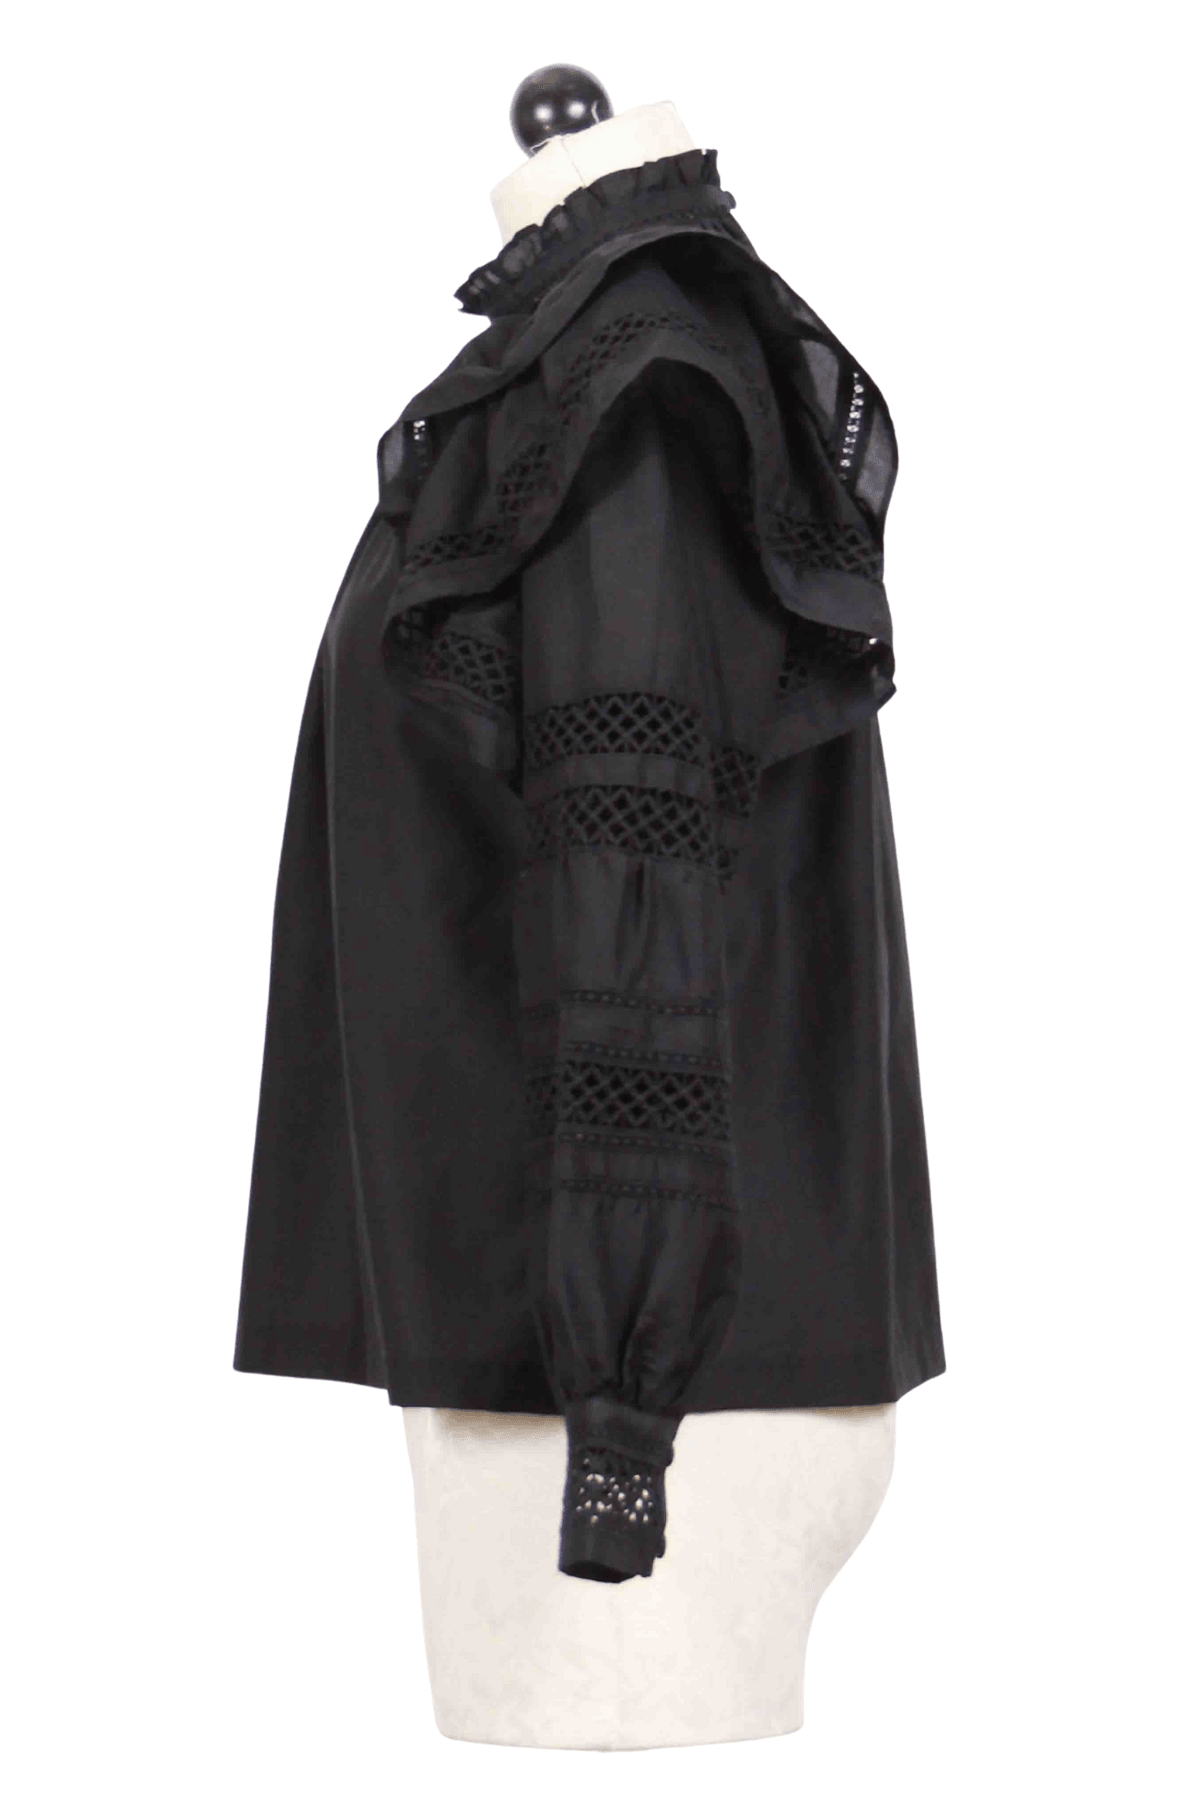 side view of Black Que Blouse by Marie Oliver